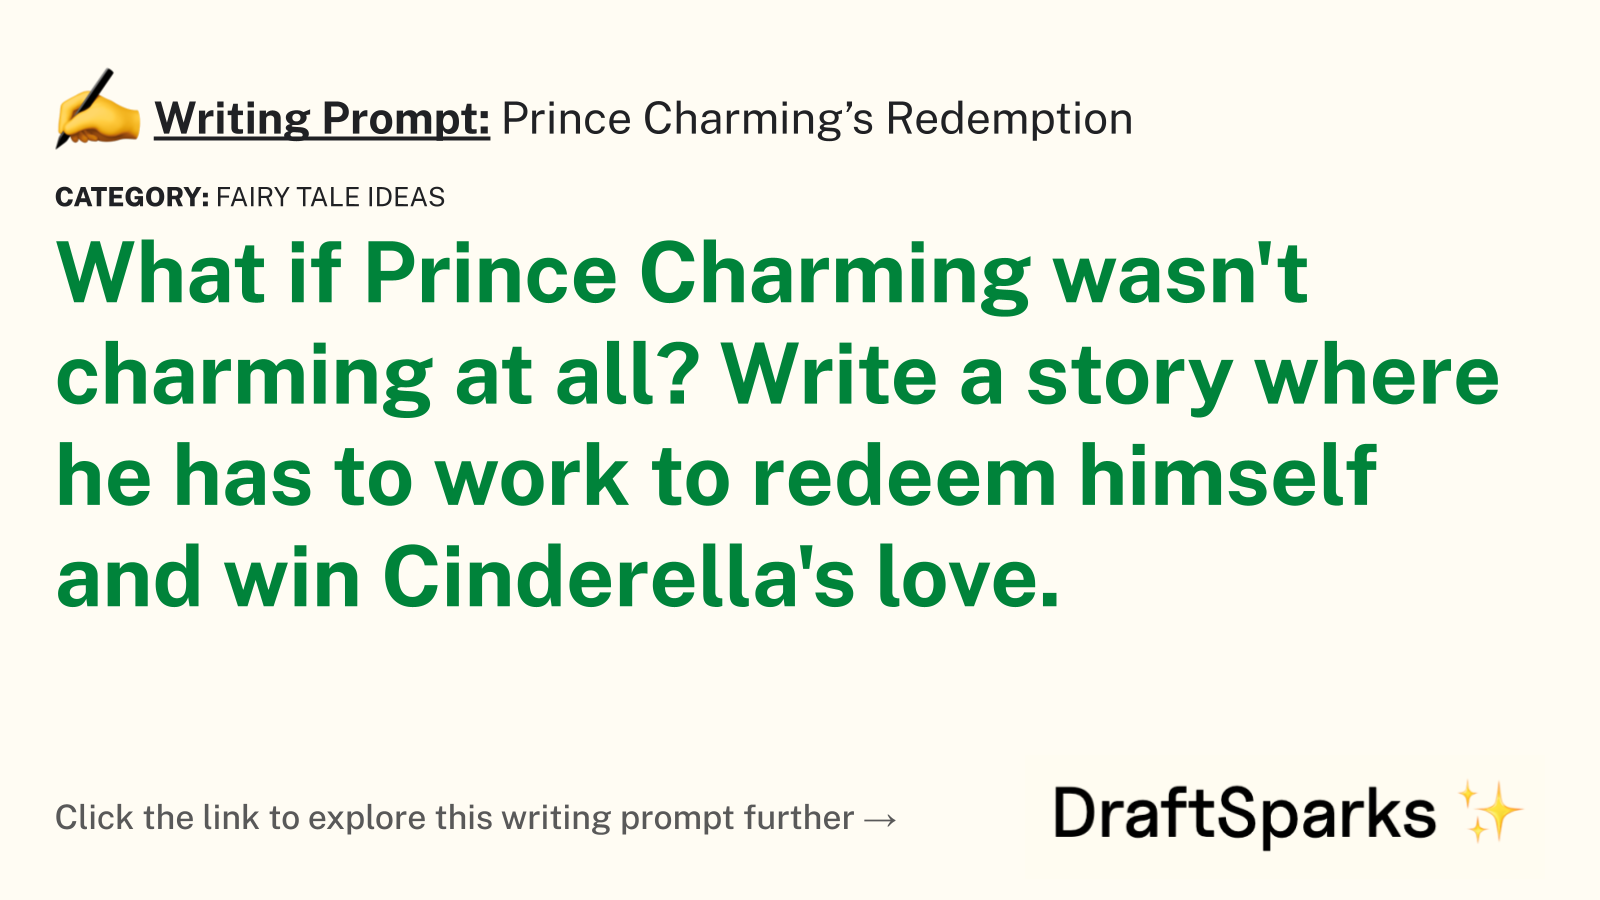 Prince Charming’s Redemption